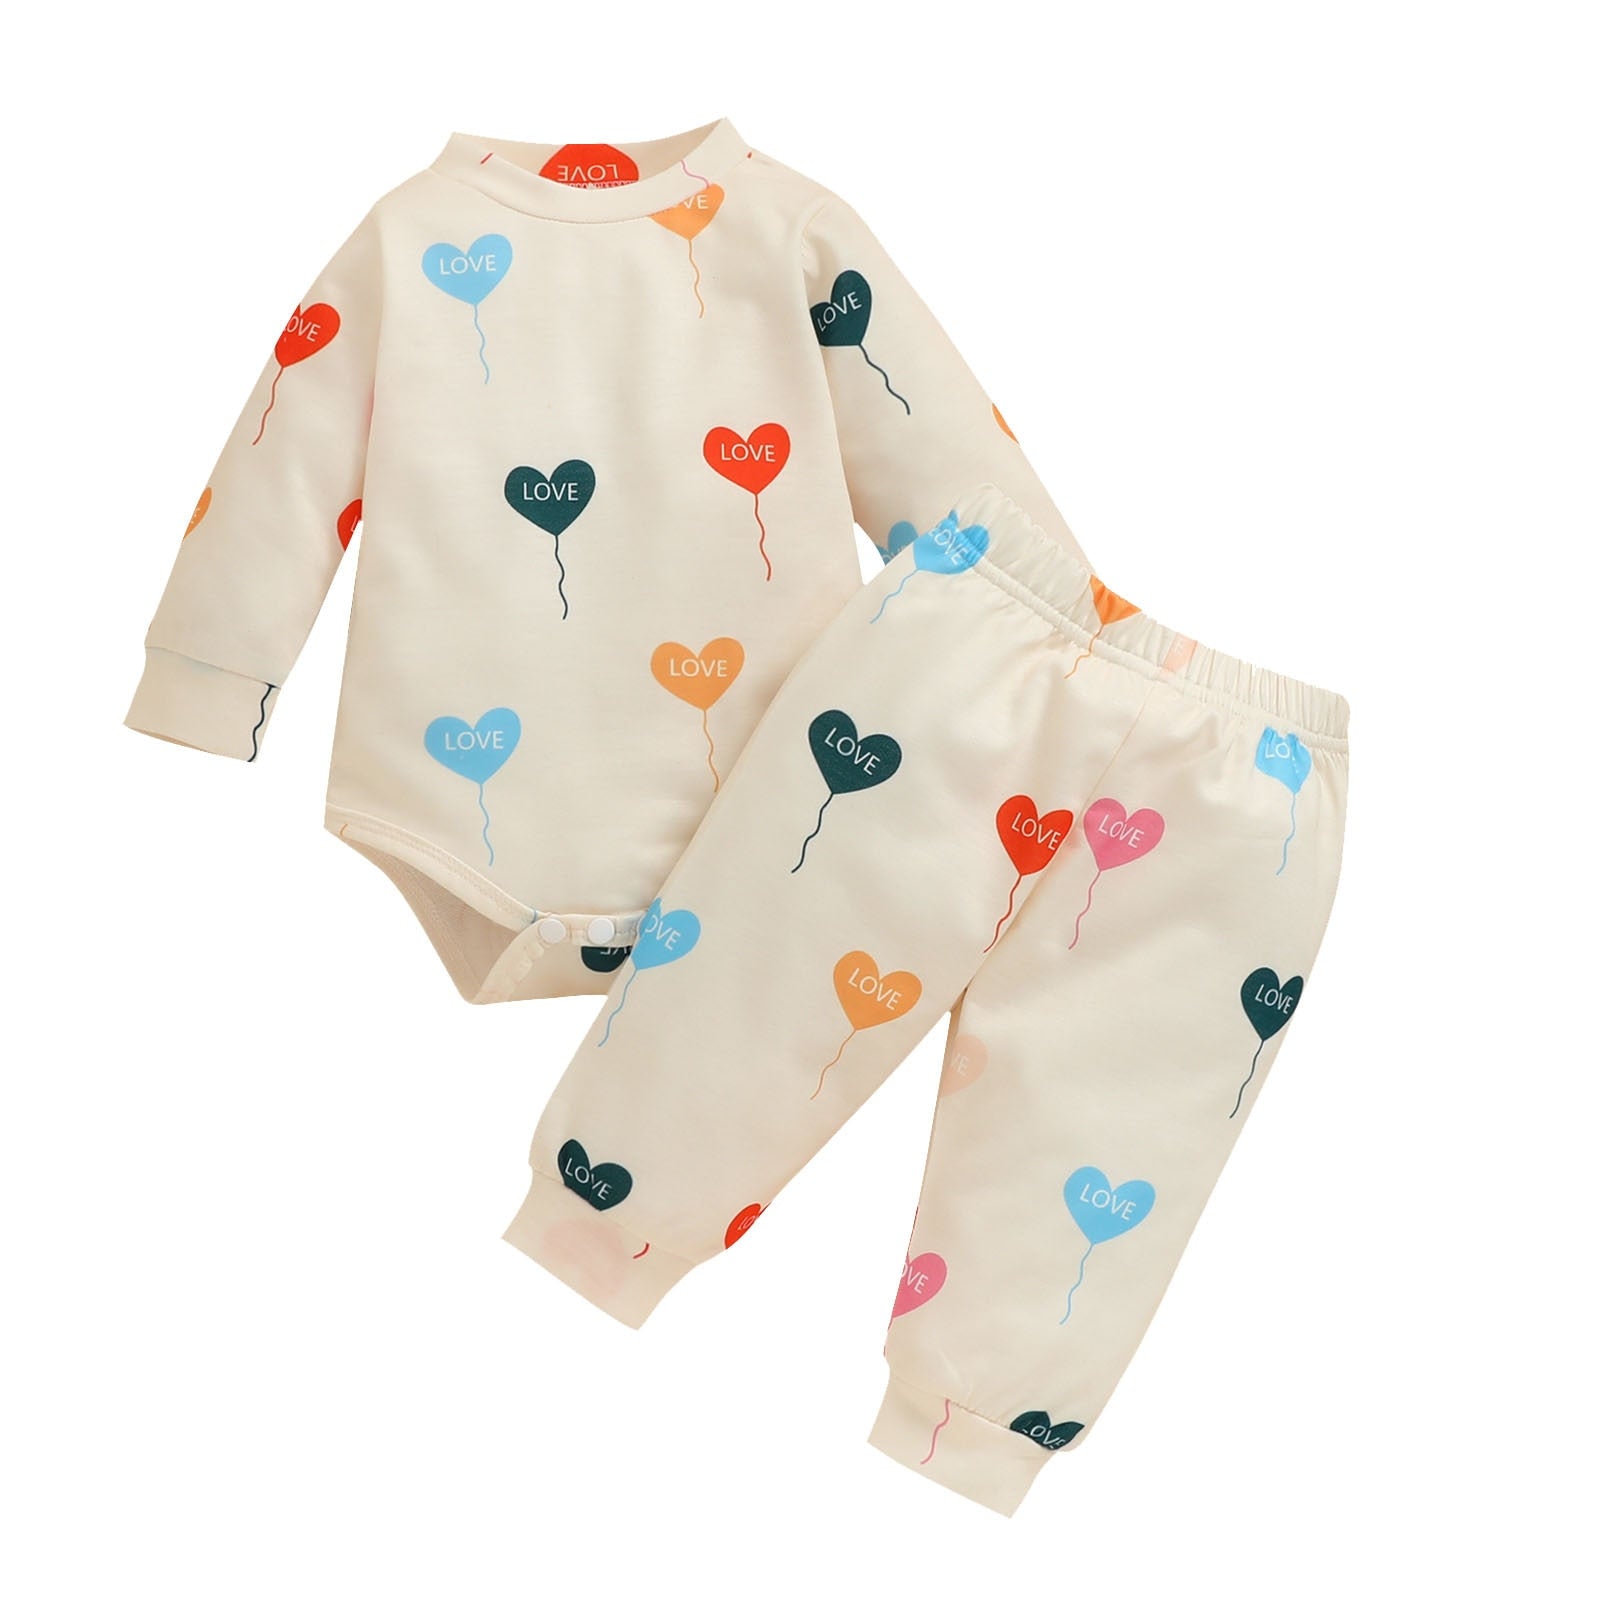 Adorable Valentine's Day Outfits for Newborn Boys and Girls